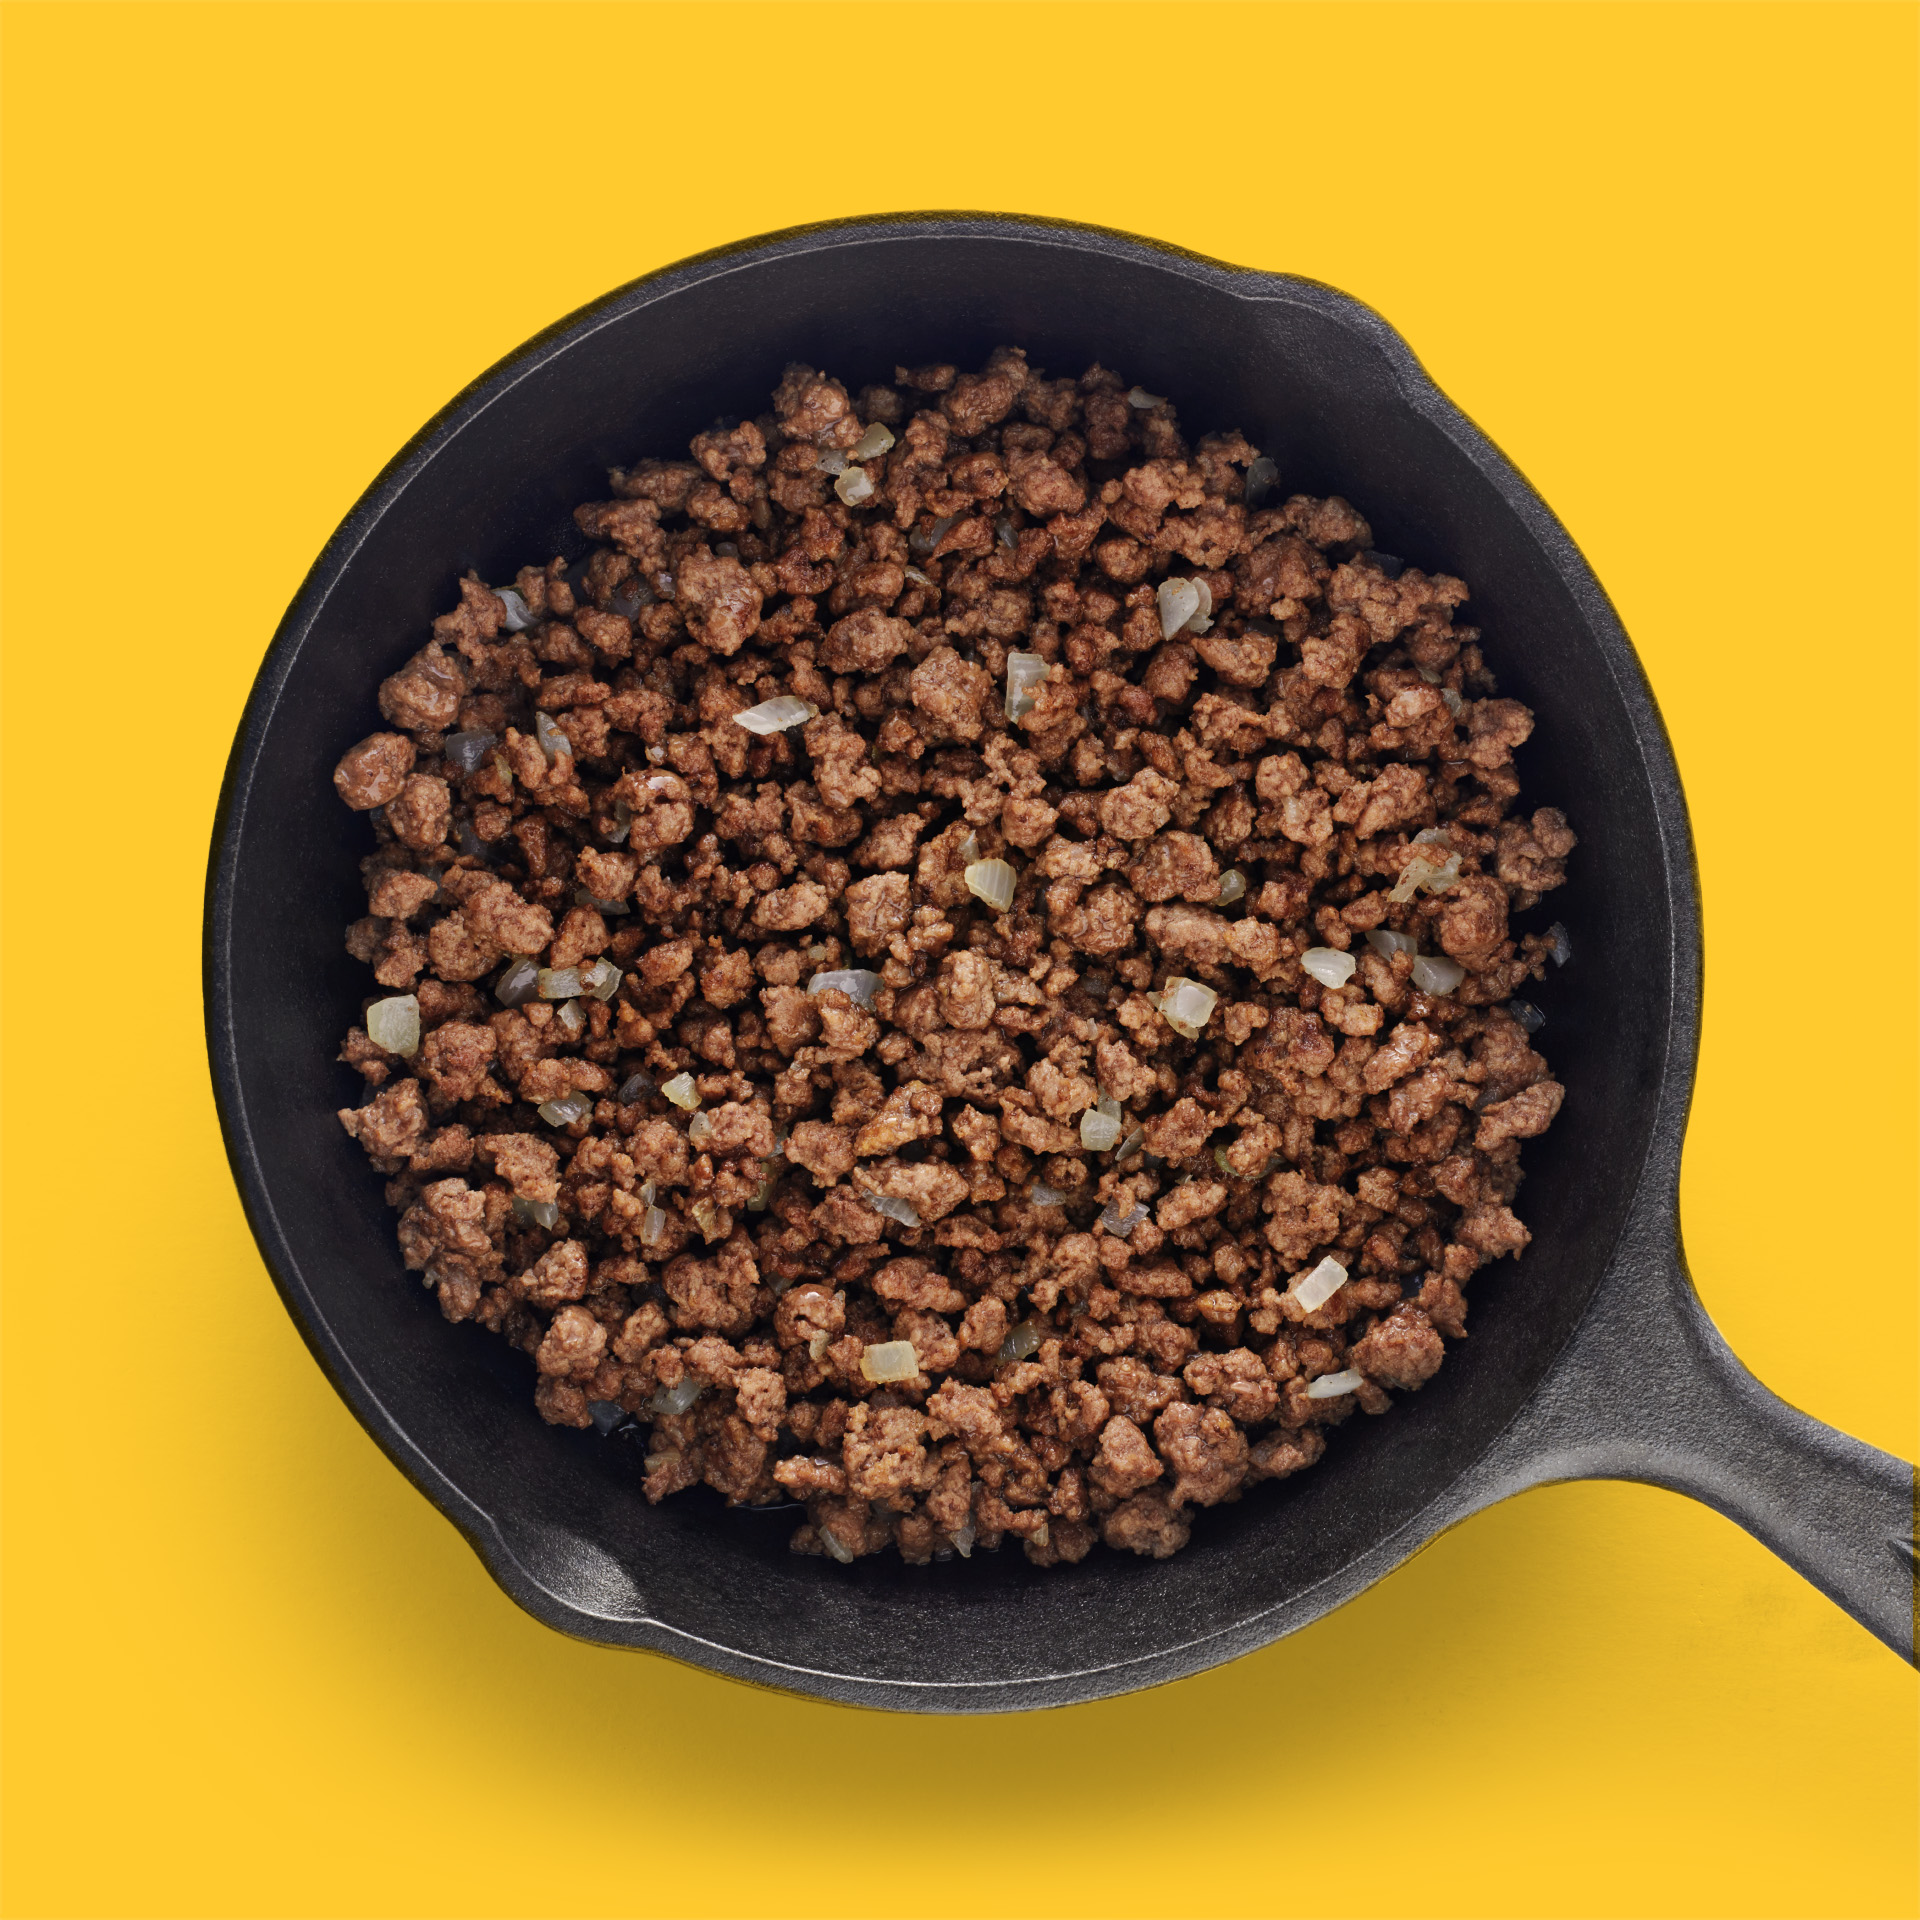 Cast iron pan full of browned ground beef with a yellow background.